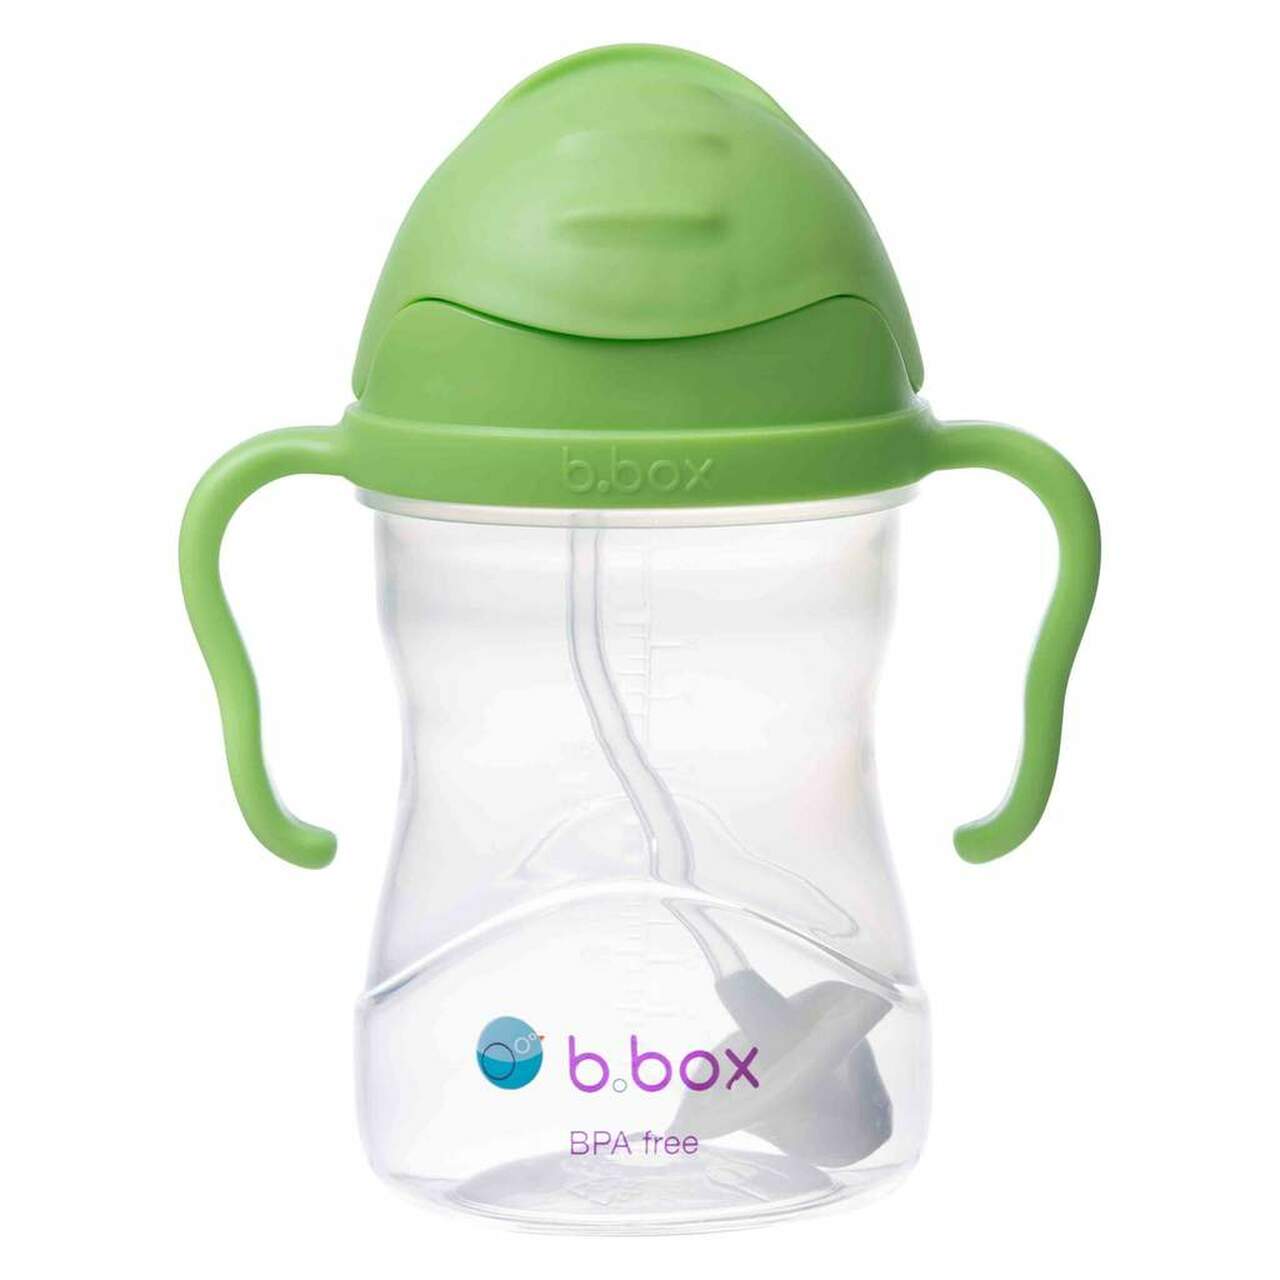 b.box Sippy Cup in Green Apple available at Bear & Moo